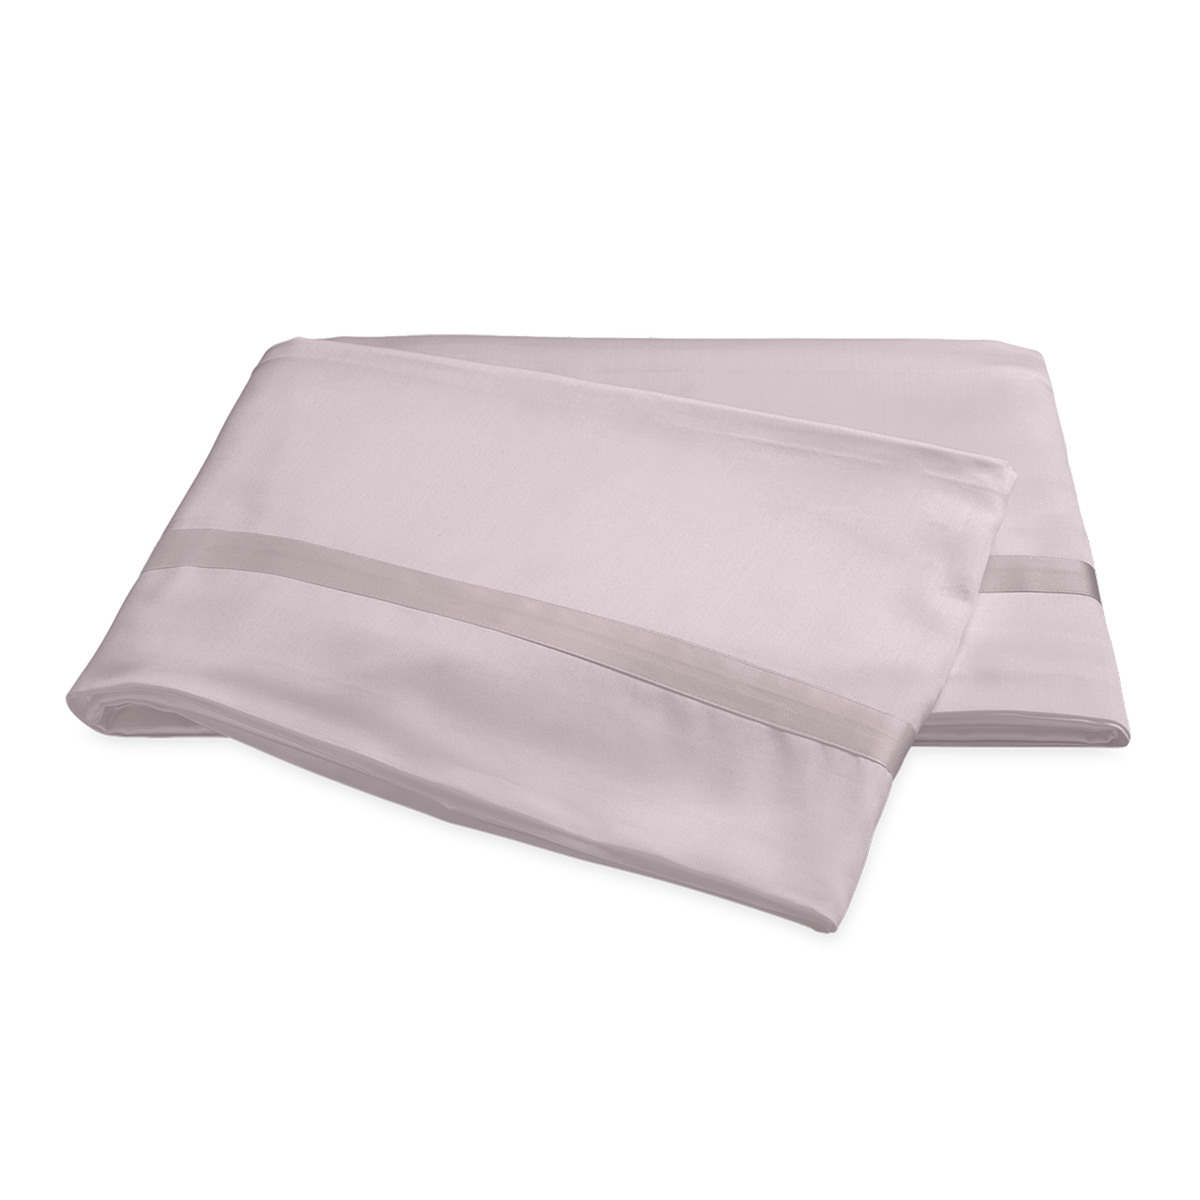 Flat Sheet of Matouk Nocturne Bedding Collection in Color Deep Lilac